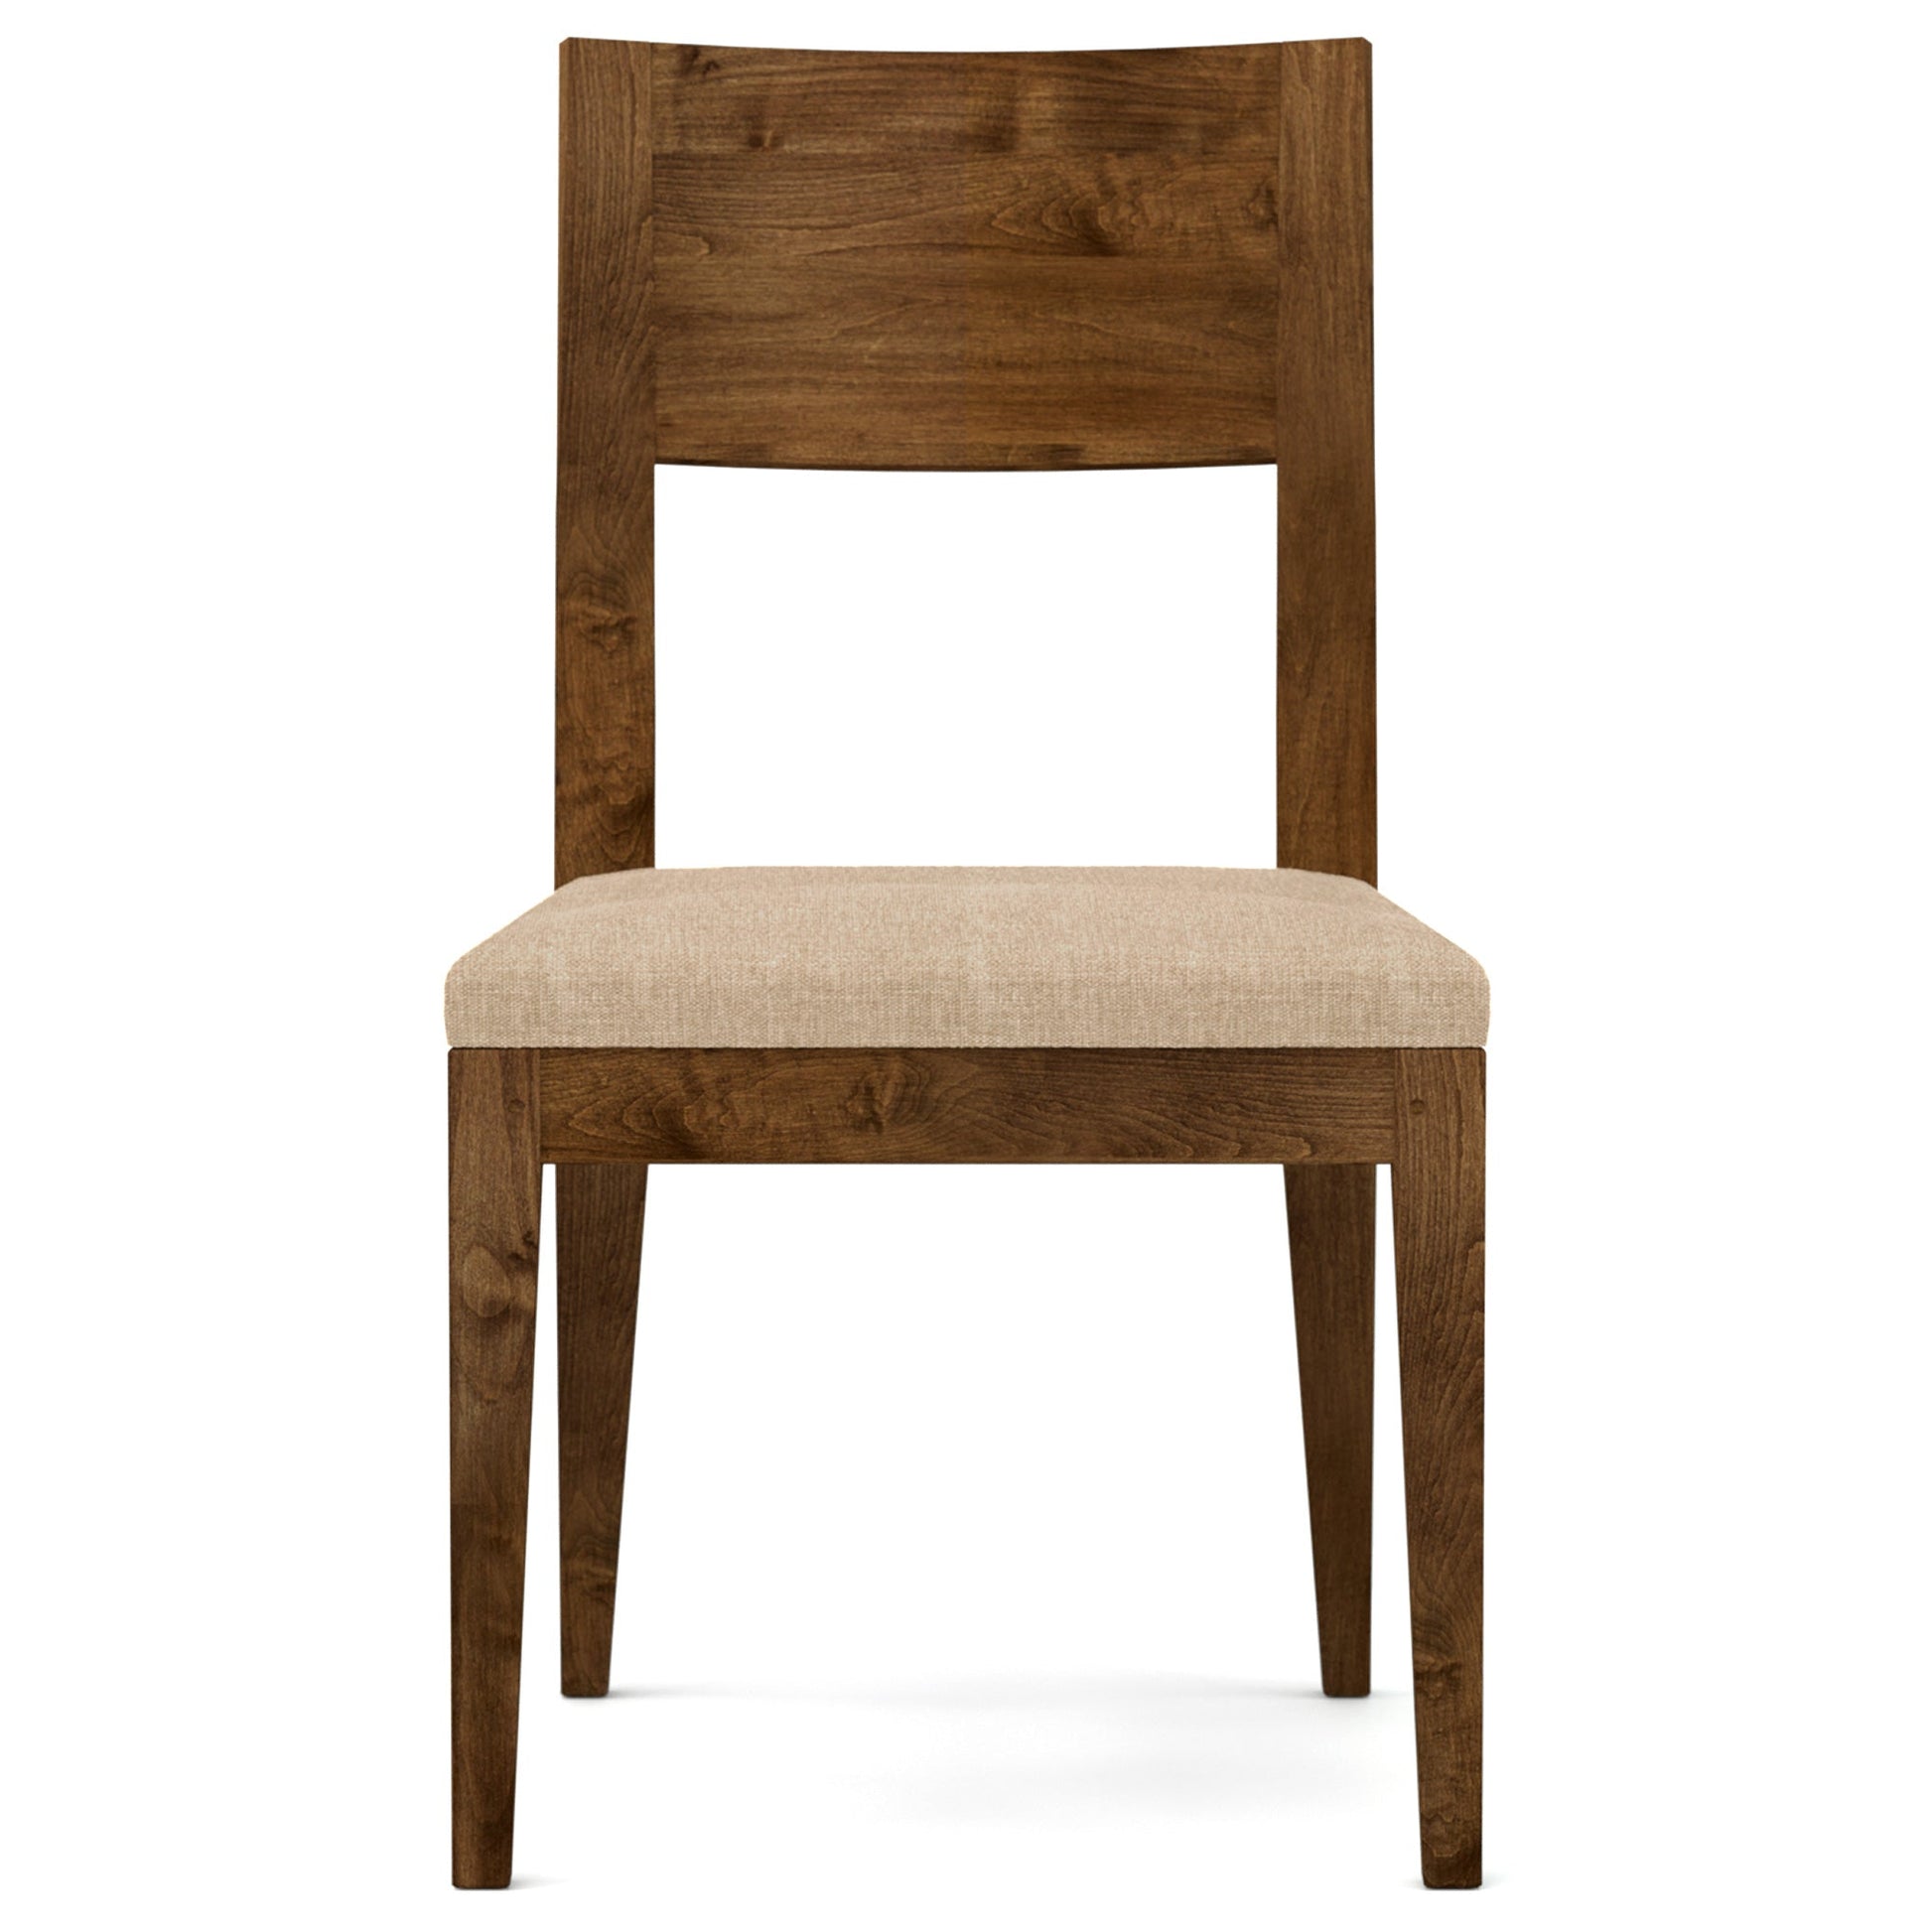 Dwyer Upholstered Side Chair